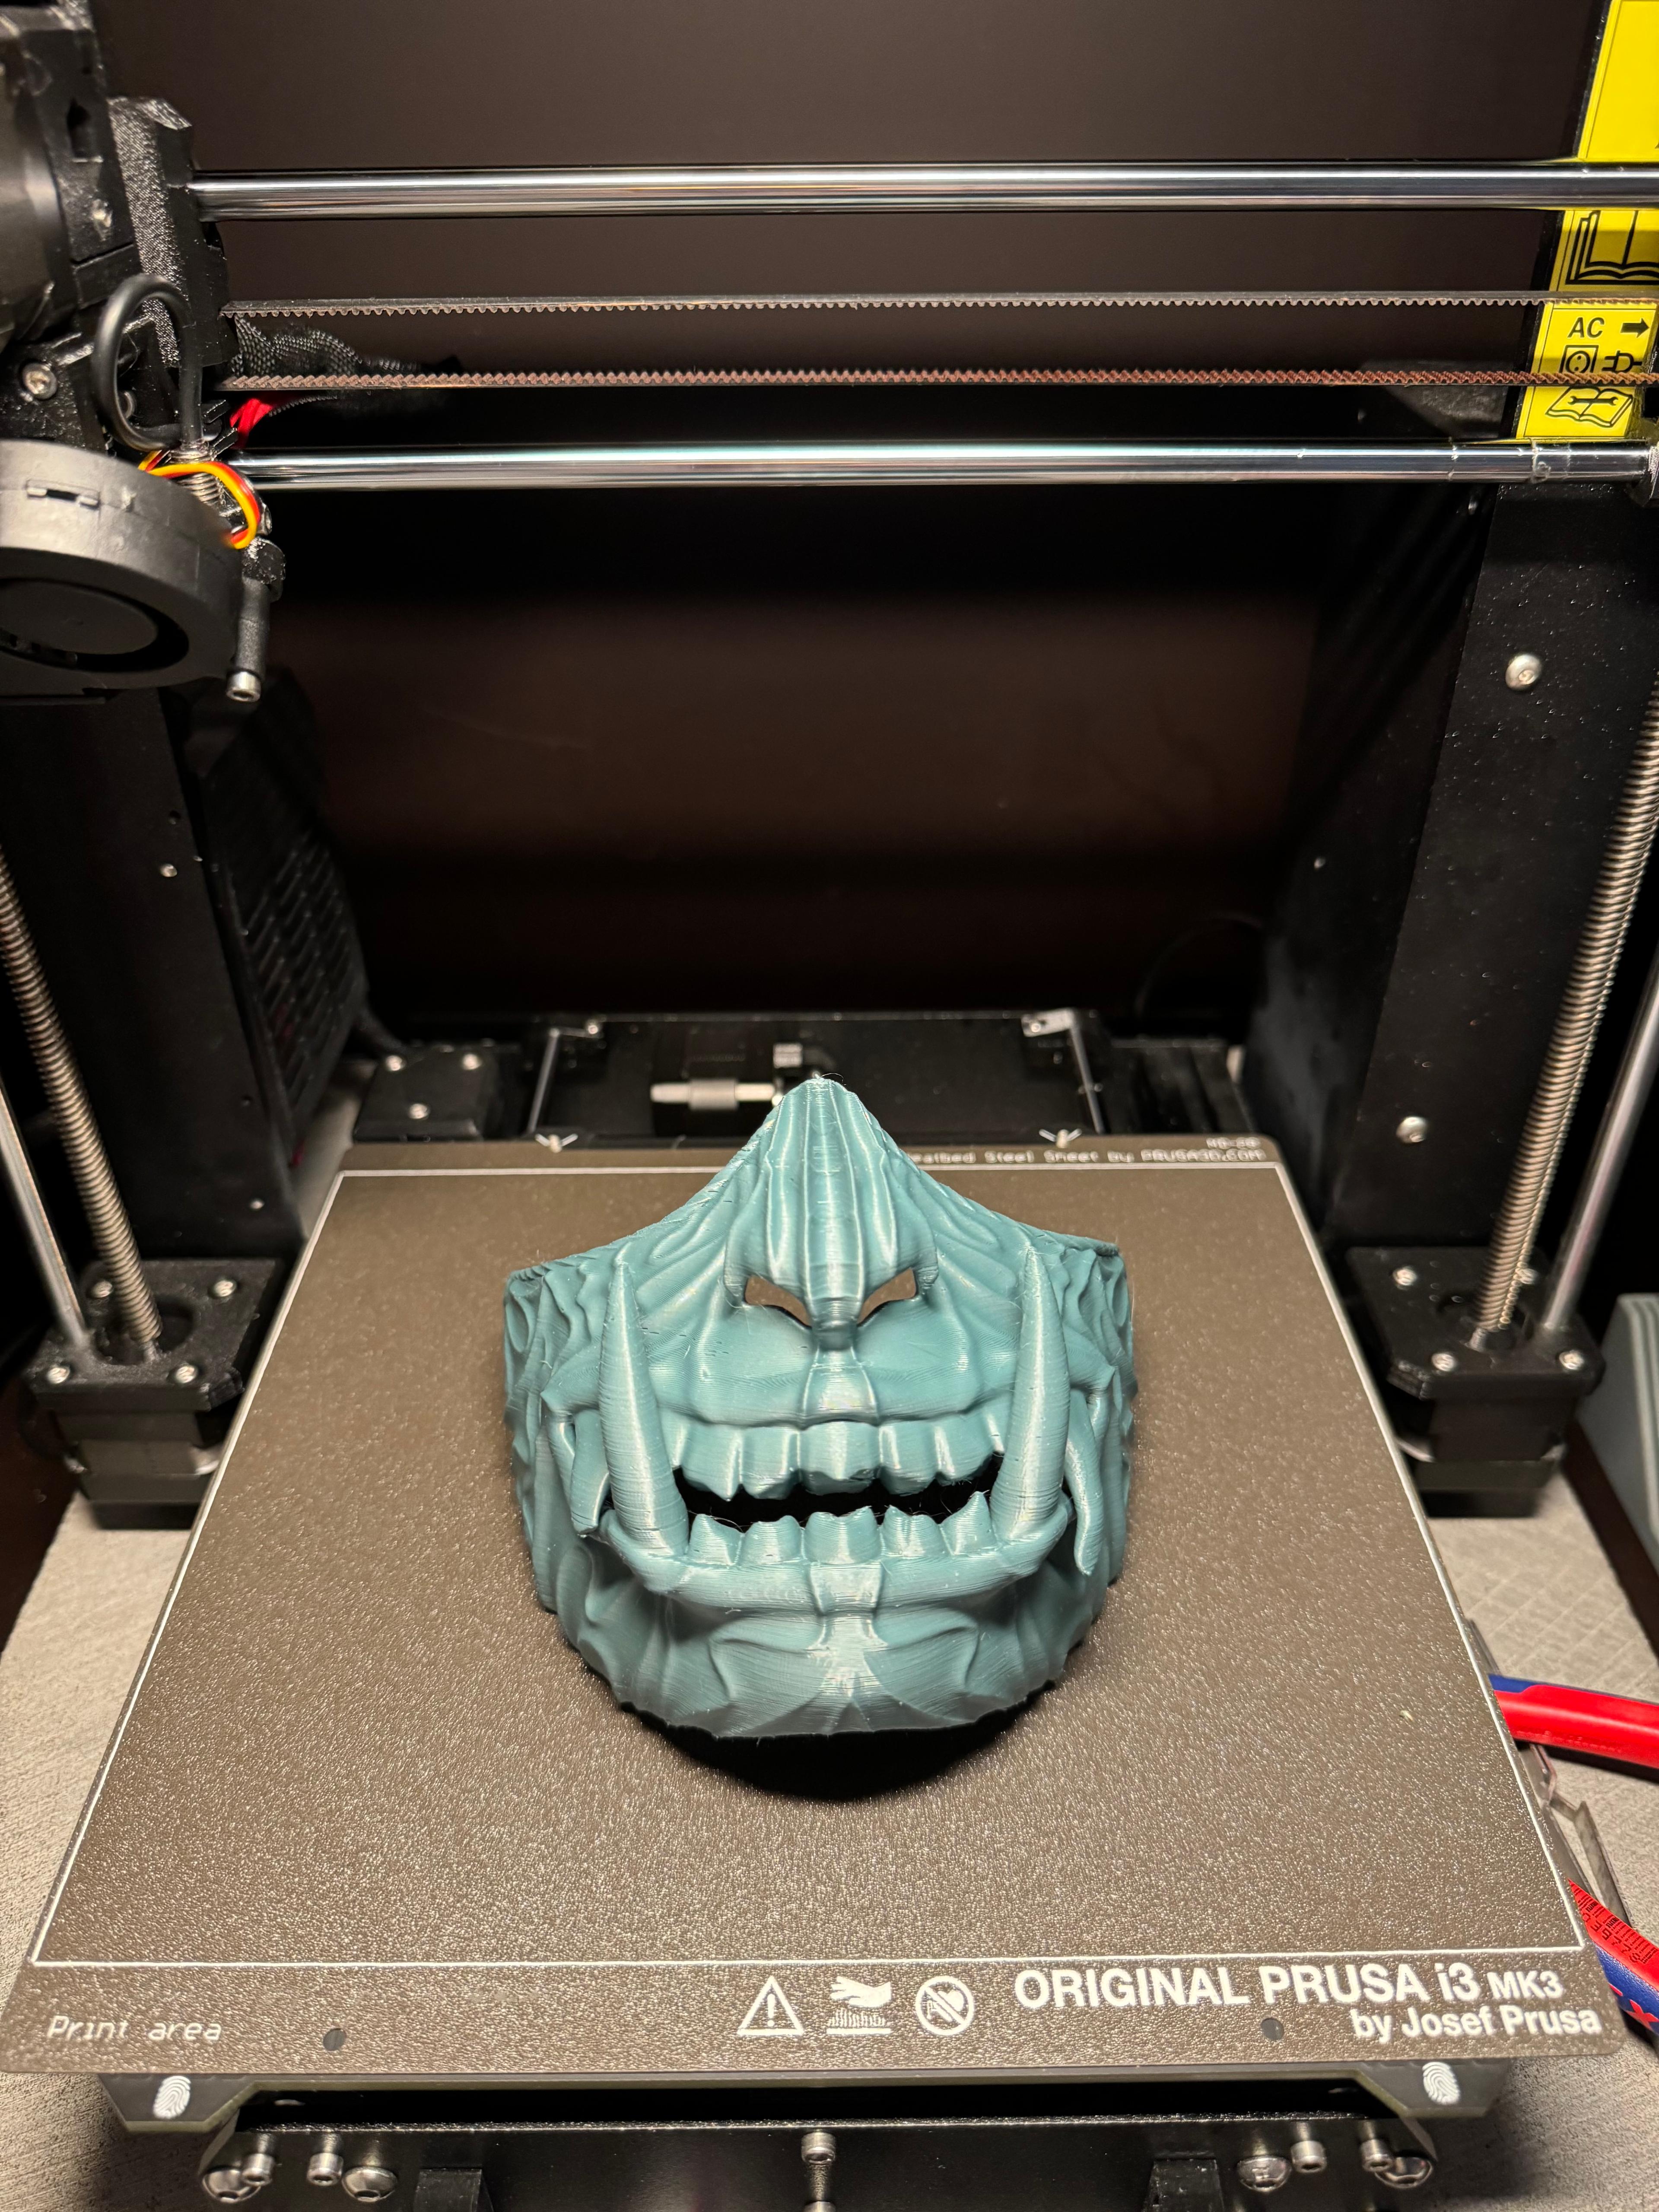 Oni Mask #1 - Did a scaled down version for my 5y/o son. Scaled to 87%, I measured his cheekbones left to right and scaled it manually on prusa slicer on the measuring net of the sheet. Was really easy. Settings on 0.2mm and 15% infill with organic supports. Removing supports on the inner teeth was a bit hard, but okay. Sanded the outline so he cannot hurt himself while playing.
Now he is playing ninja with Oni mask like in Ninjago. - 3d model